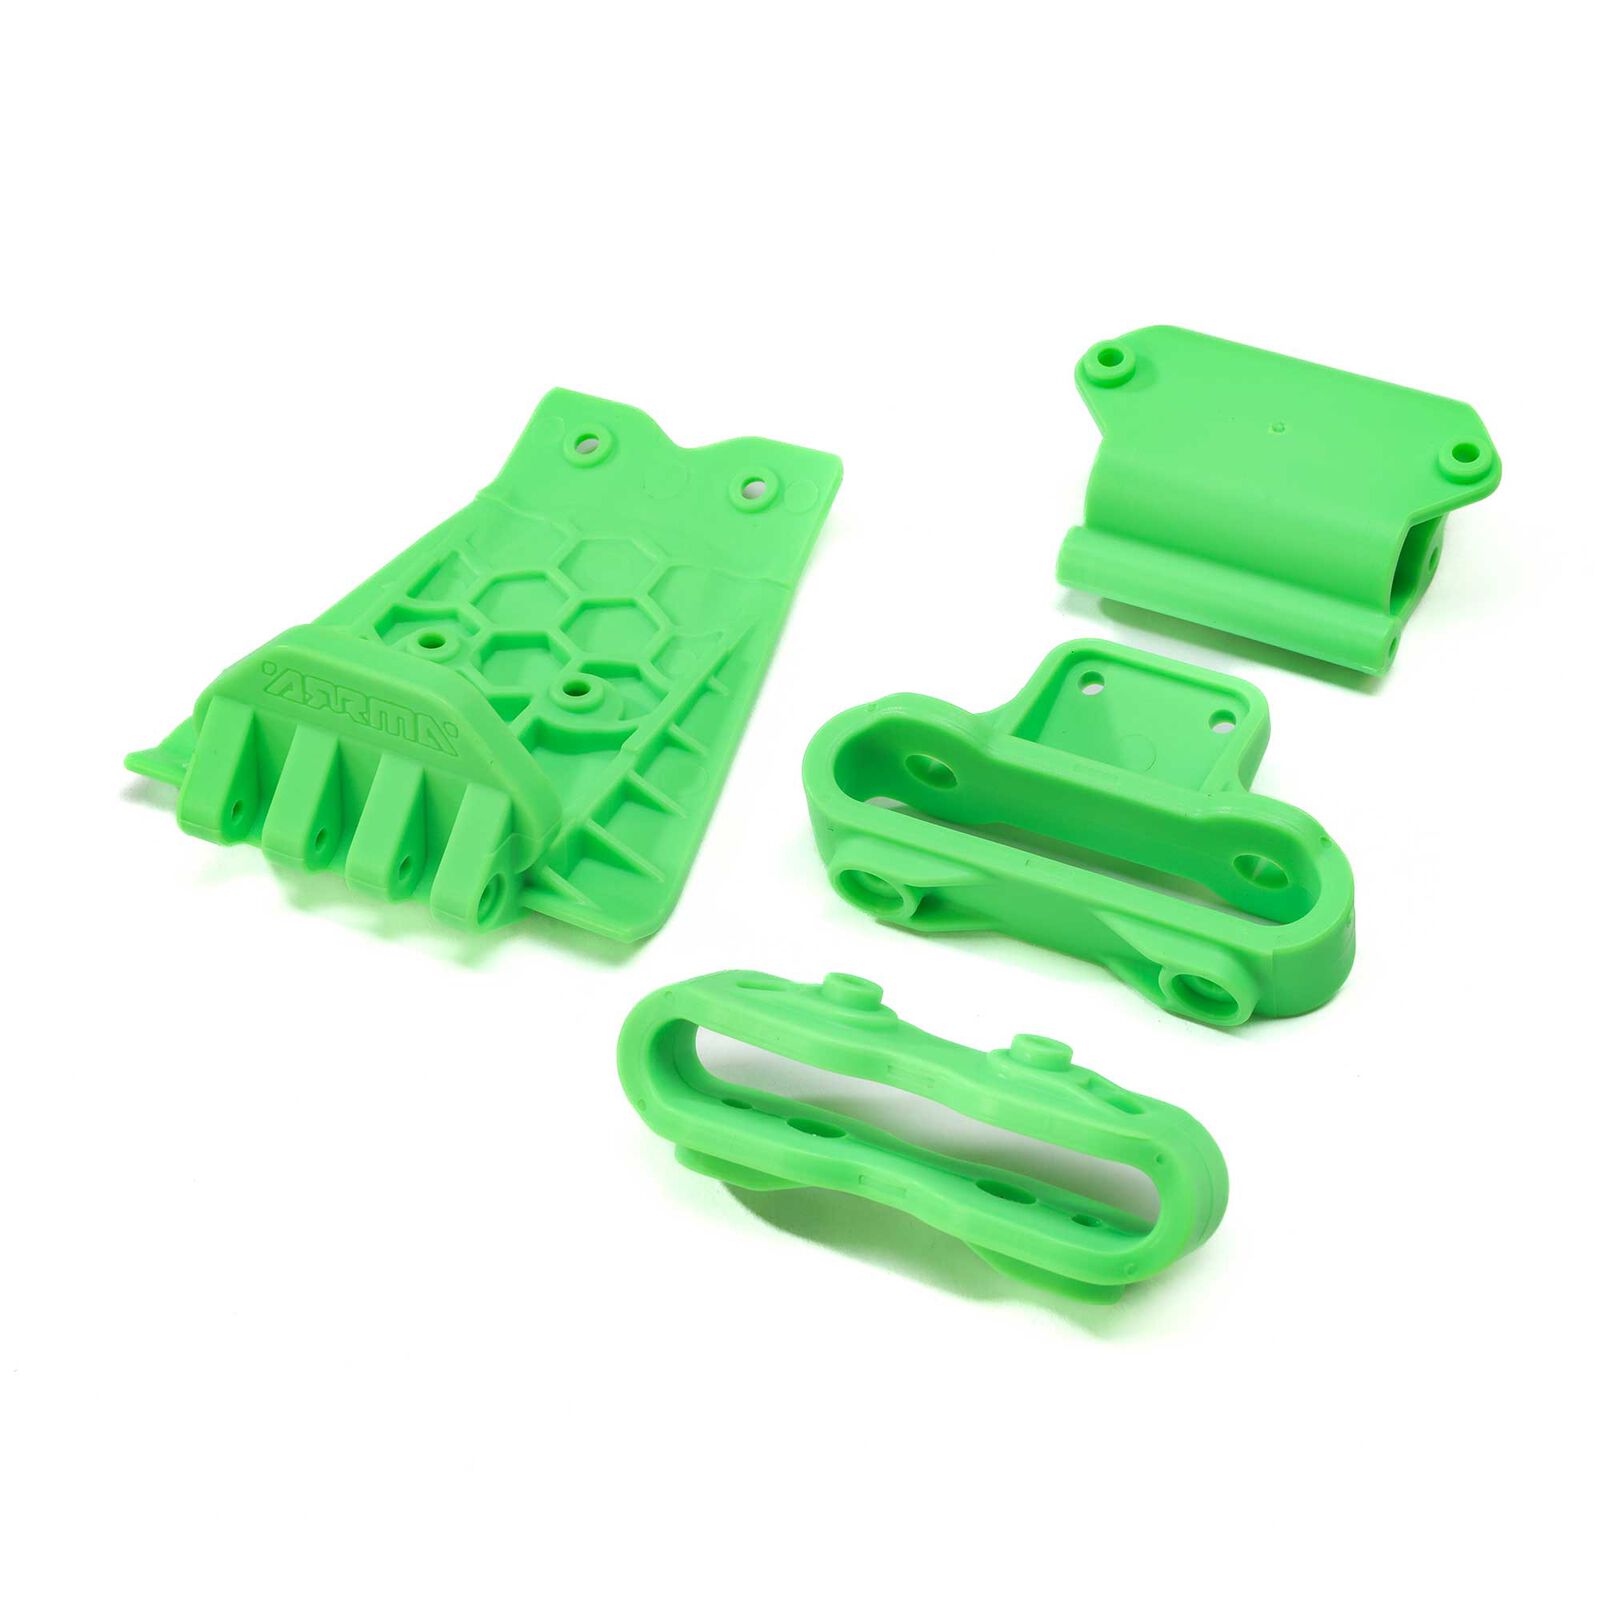 Lower Skid And Bumper Mount Set, Green